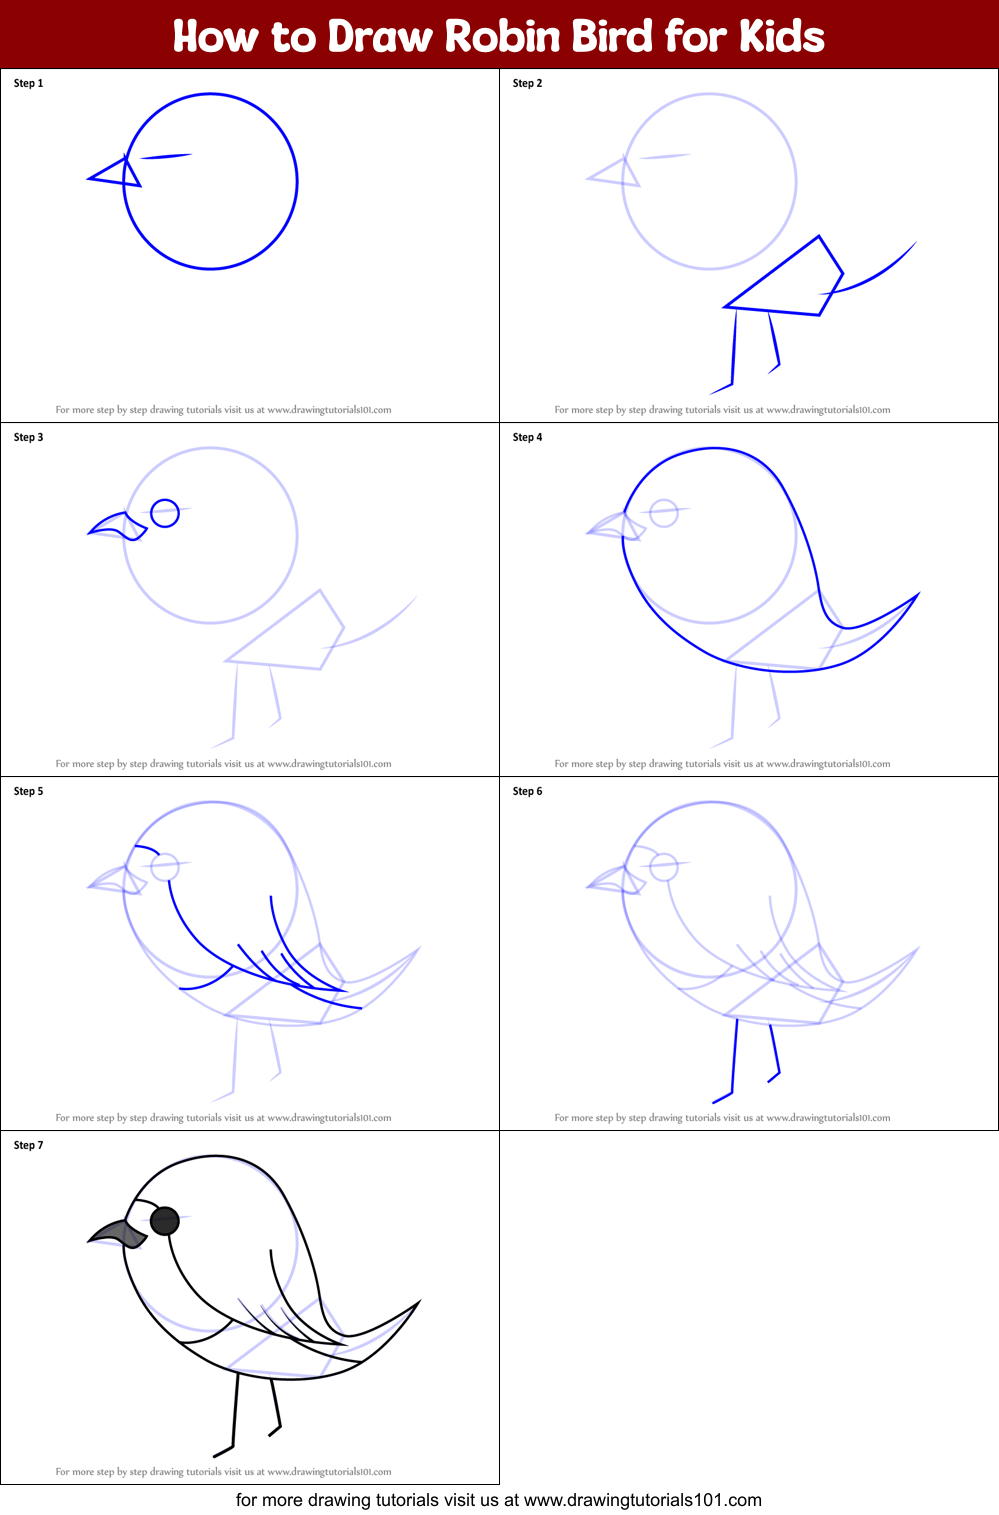 How to Draw Robin Bird for Kids printable step by step drawing sheet